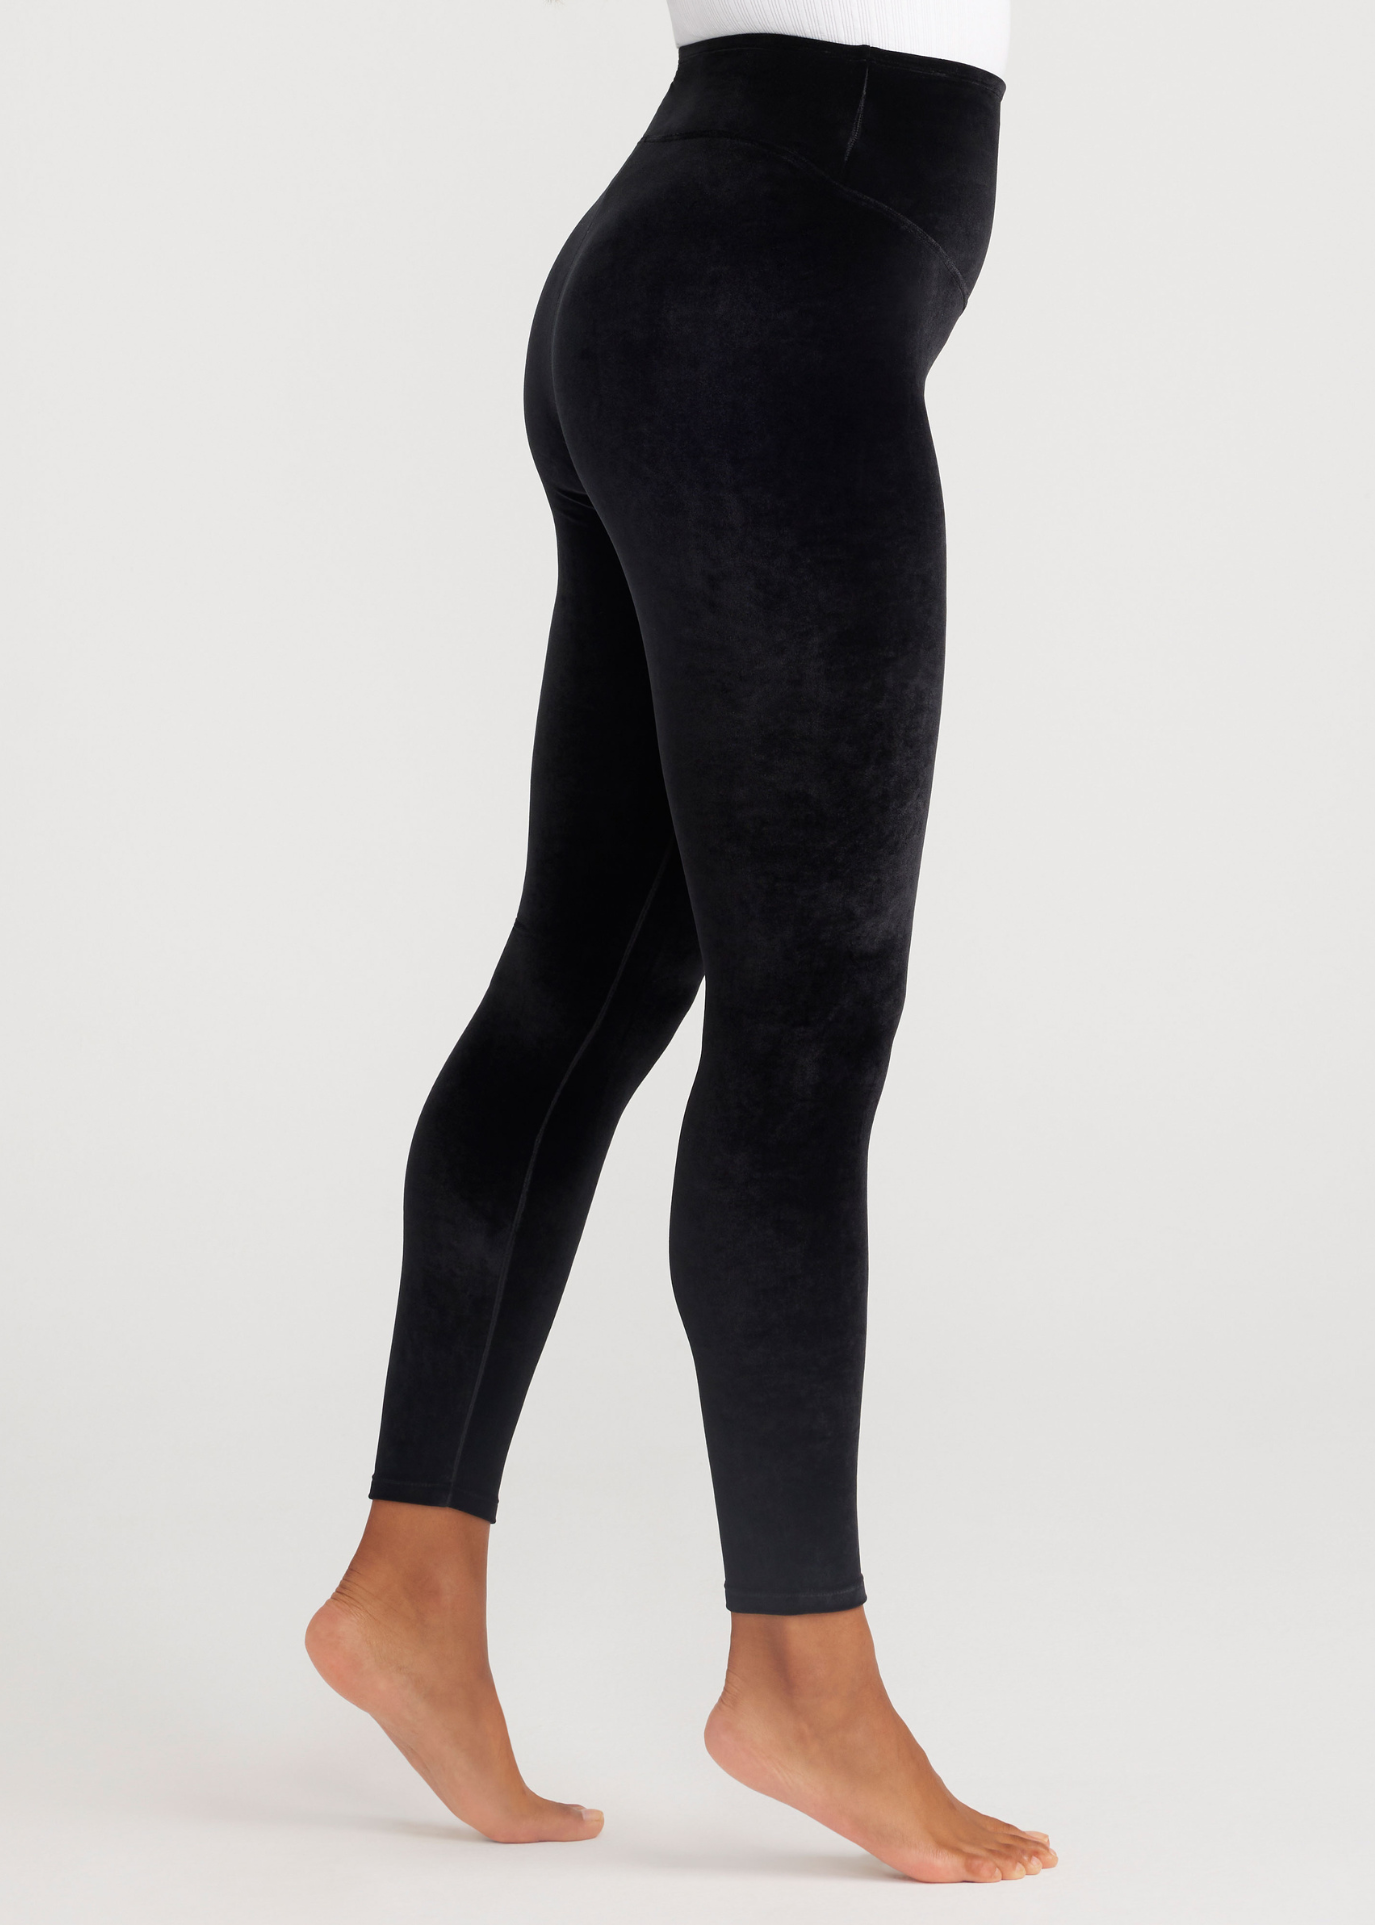 Yummie Seamless Shaping Leggings, Black, Size M/L, from Soma